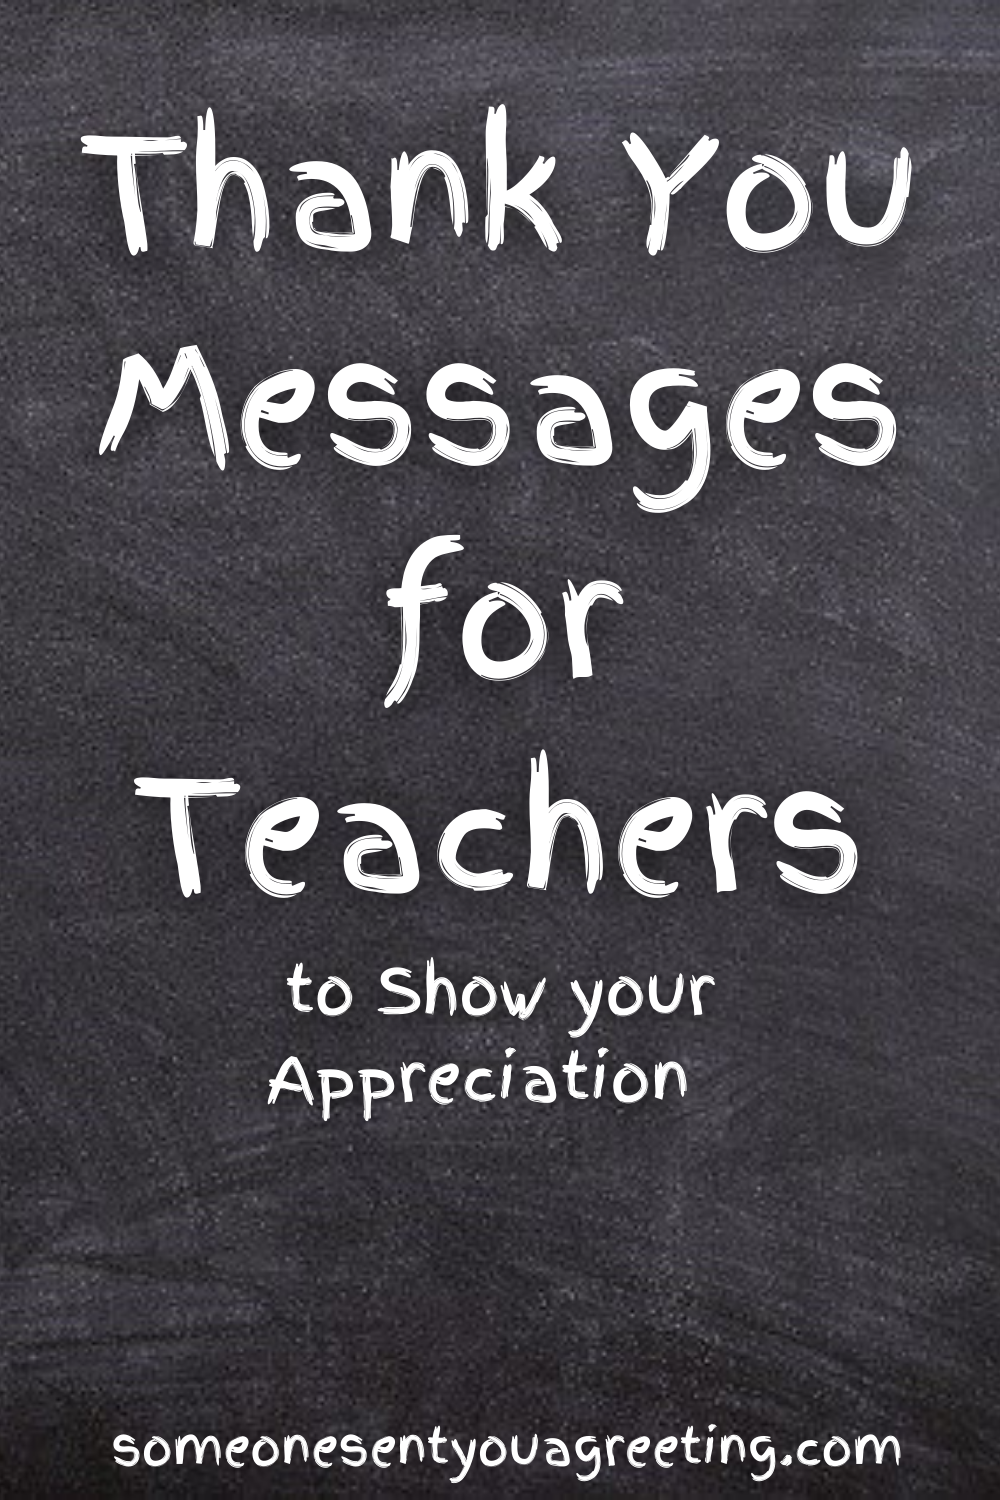 Thank You Messages for Teachers to Show Your Appreciation - Someone